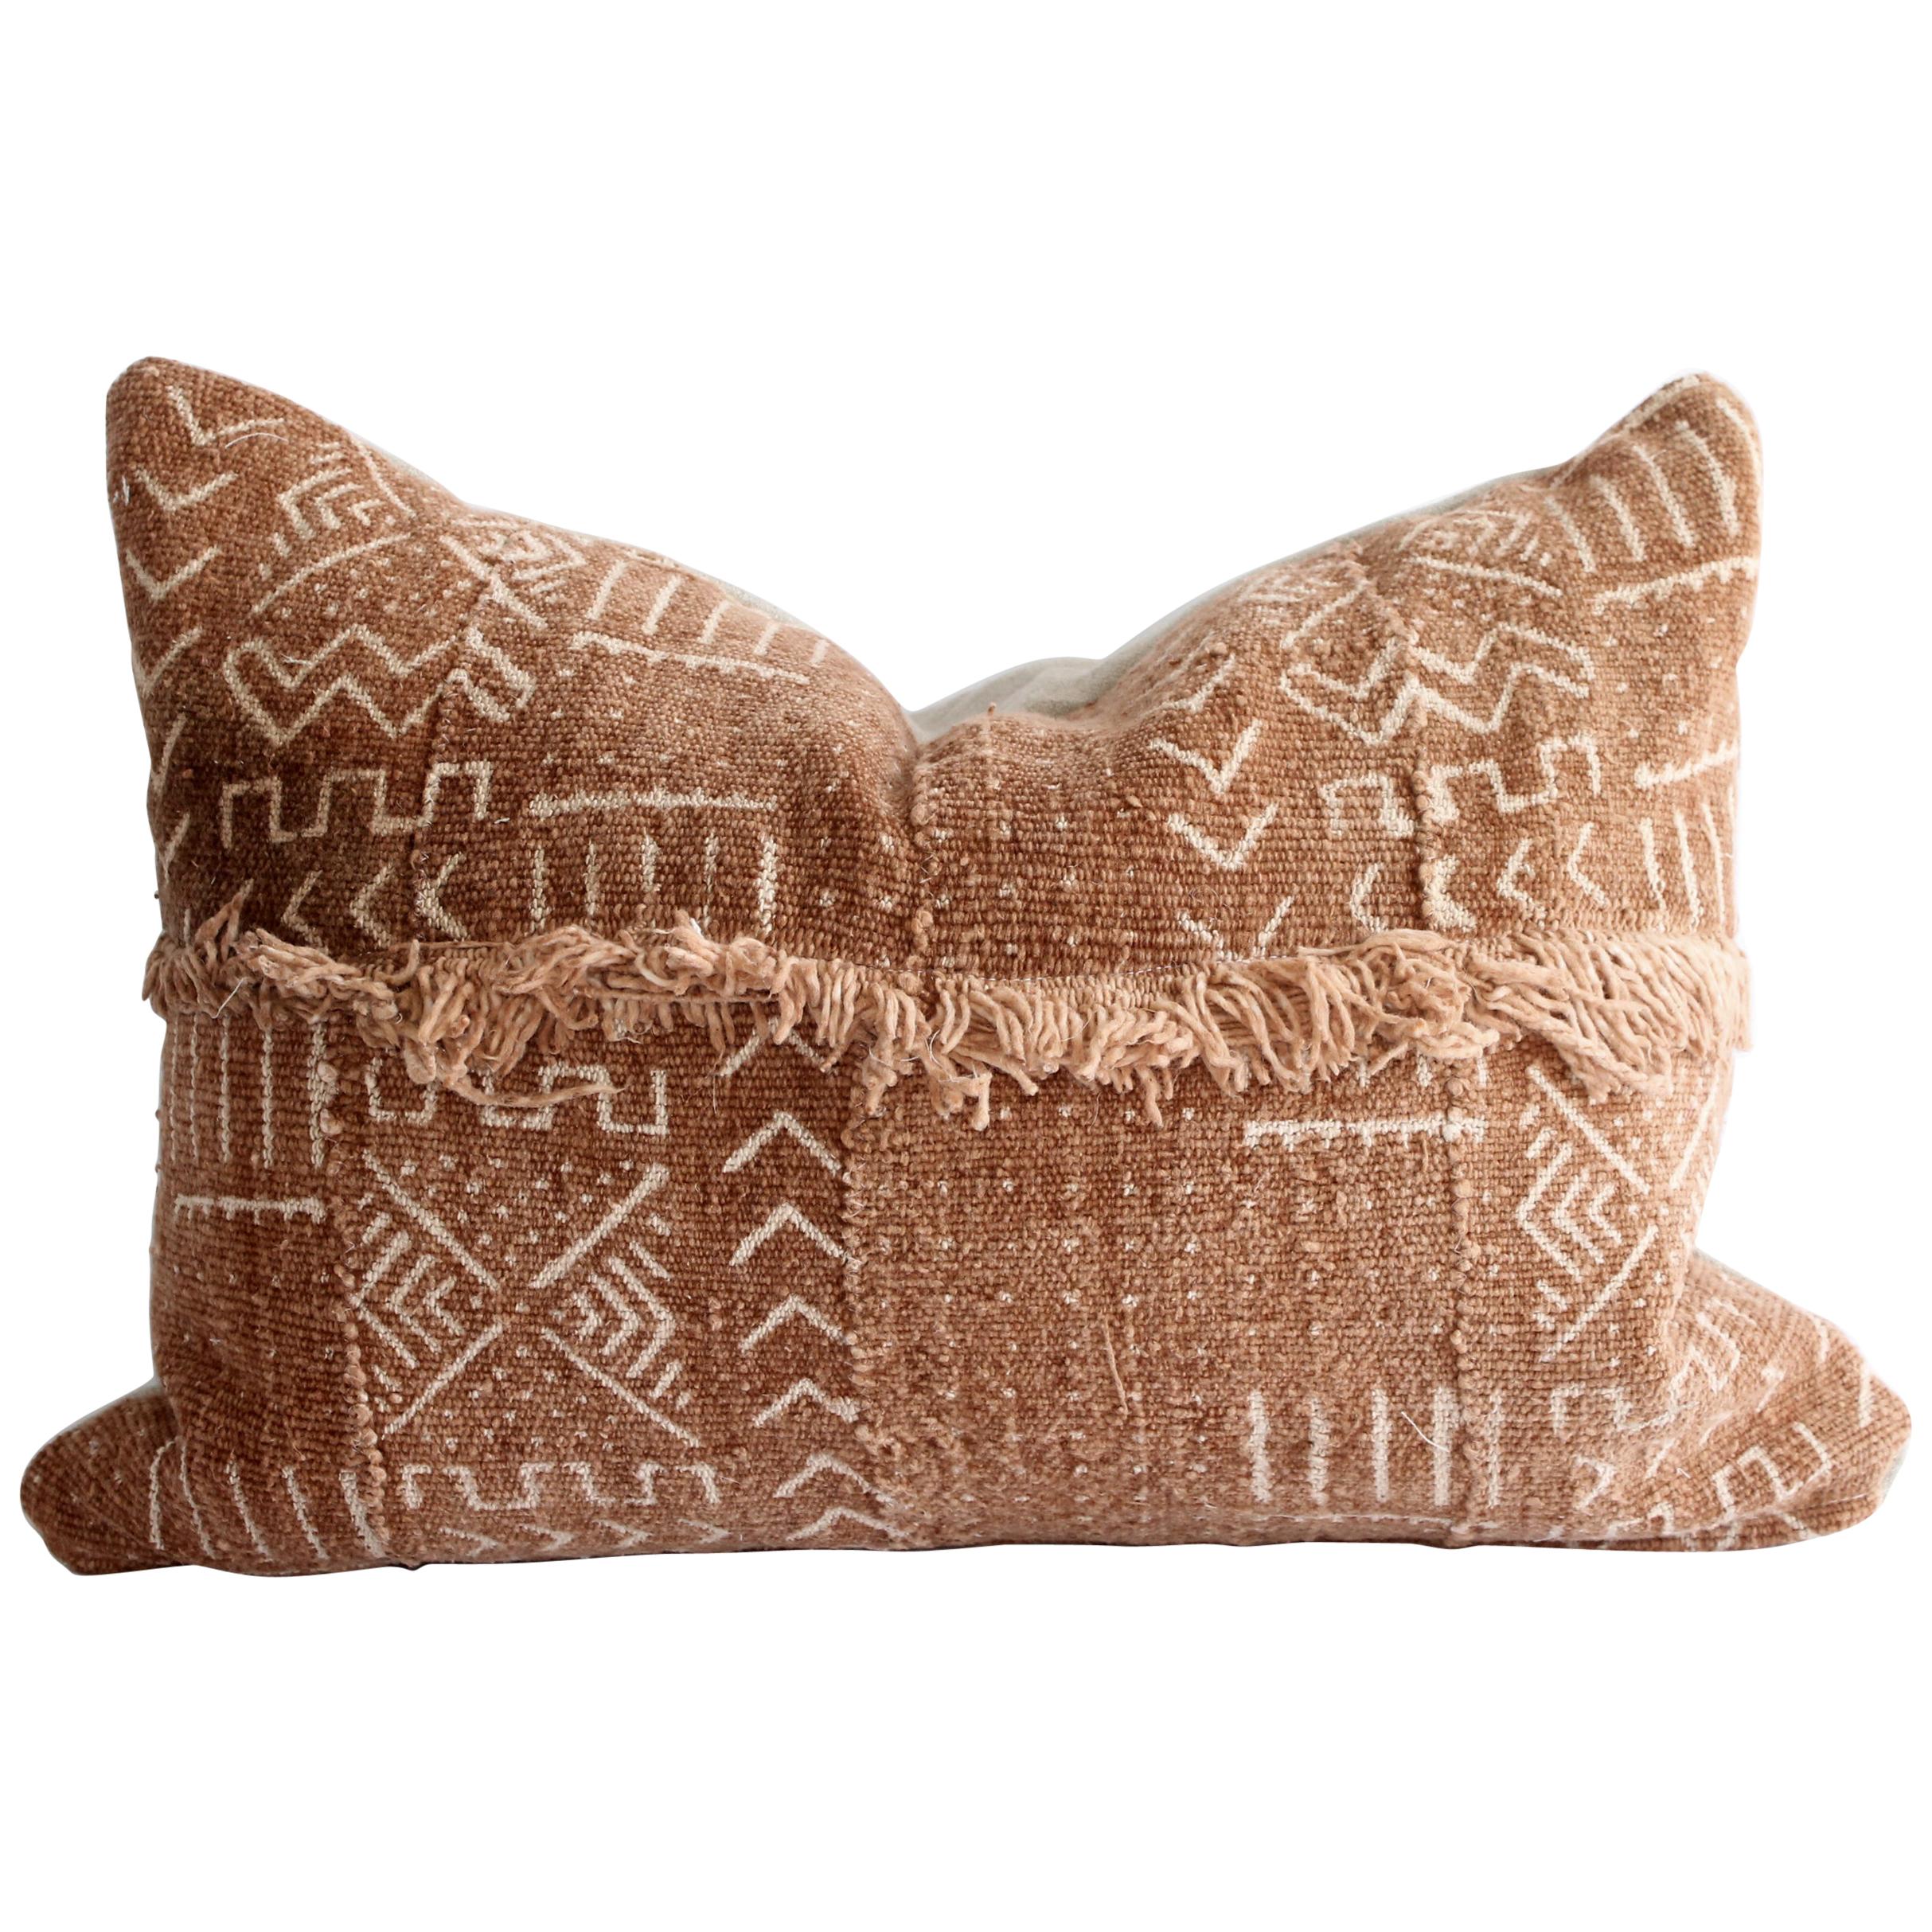 Vintage African Mudcloth Pillows with Original Fringe Detail